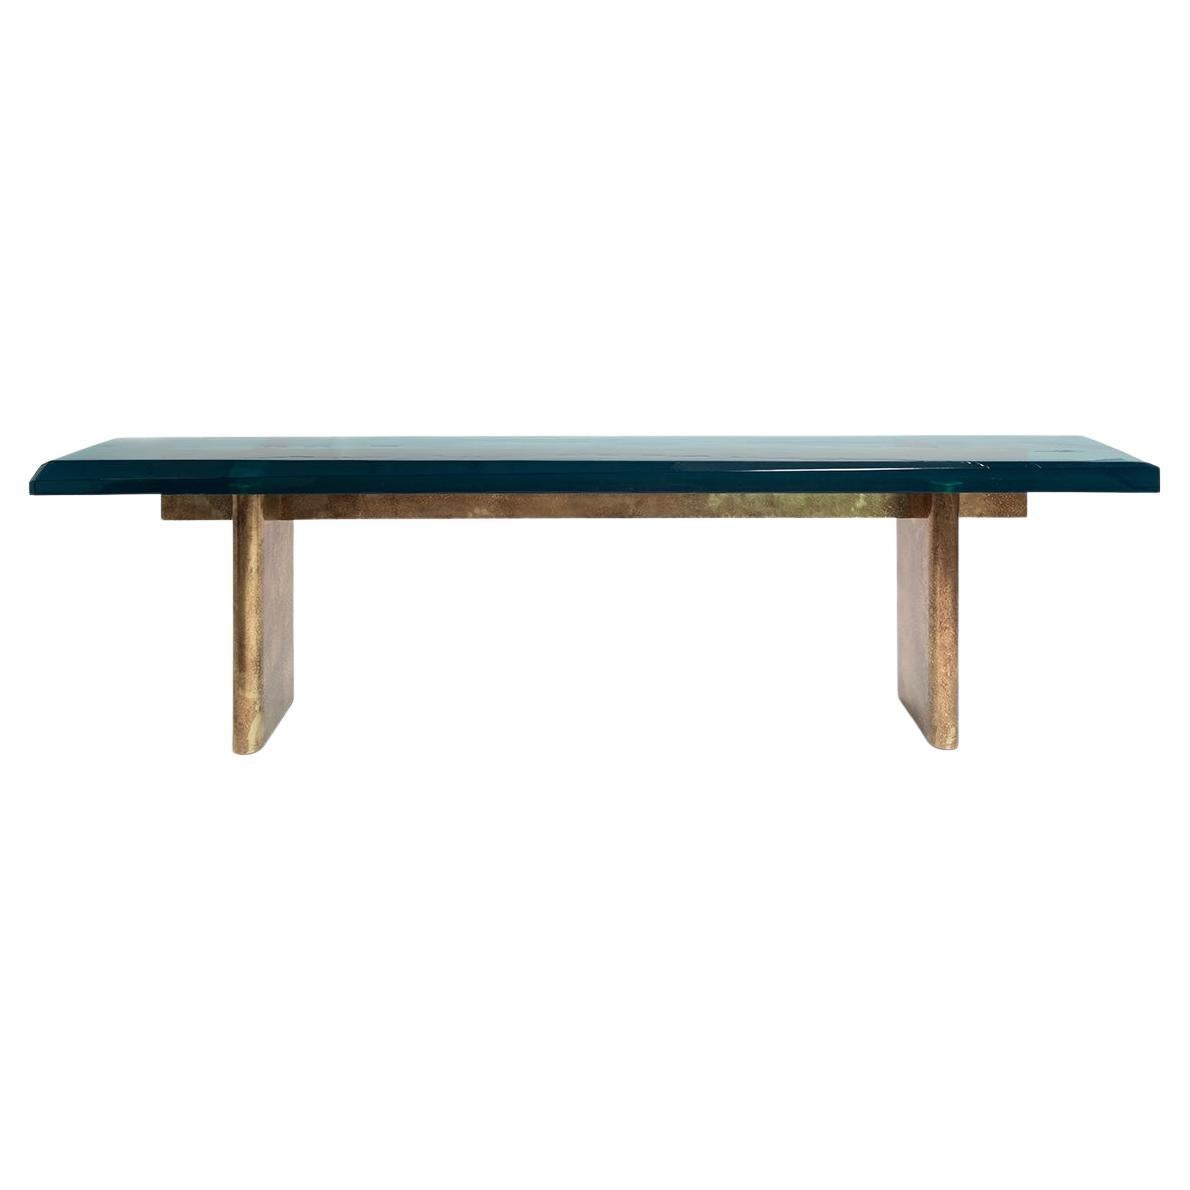 Maree Table / Desk, IT For Sale